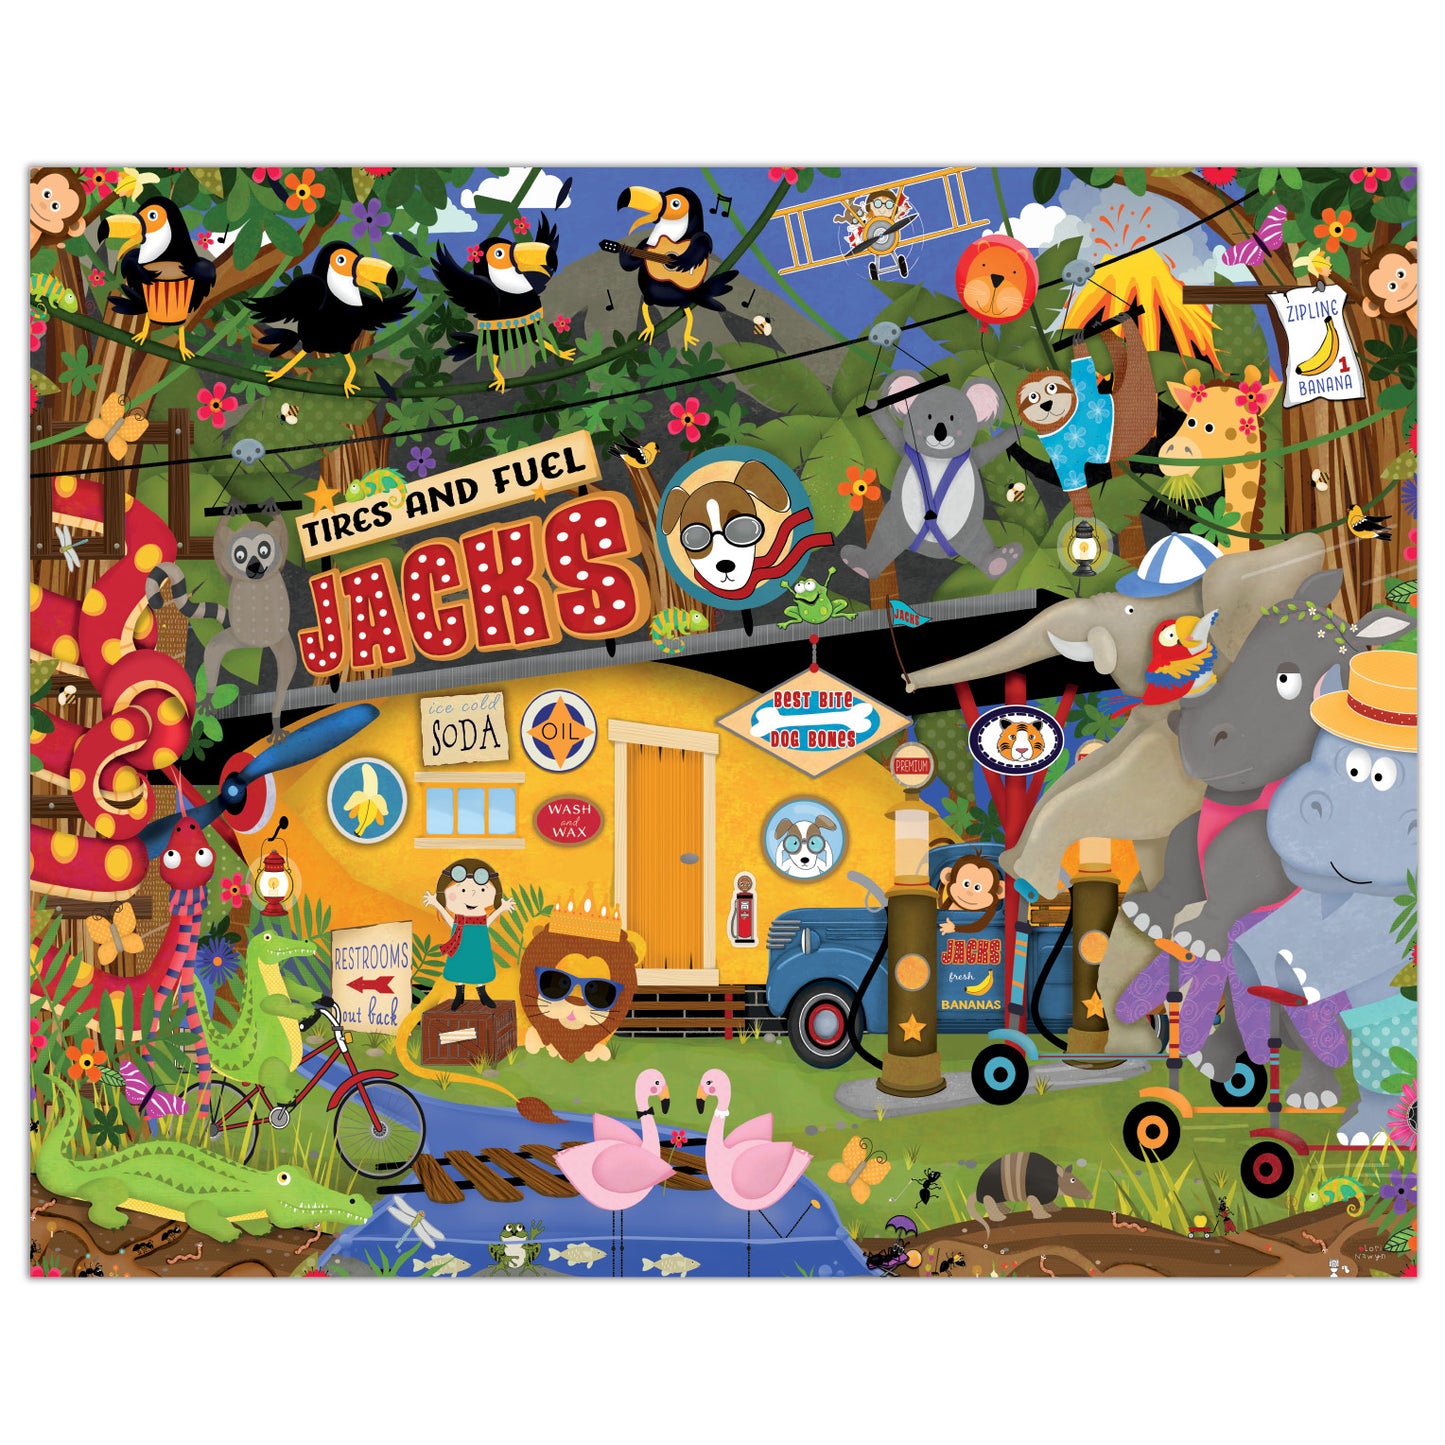 Abbie and Jack In the Jungle - 300 Piece Jigsaw Puzzle